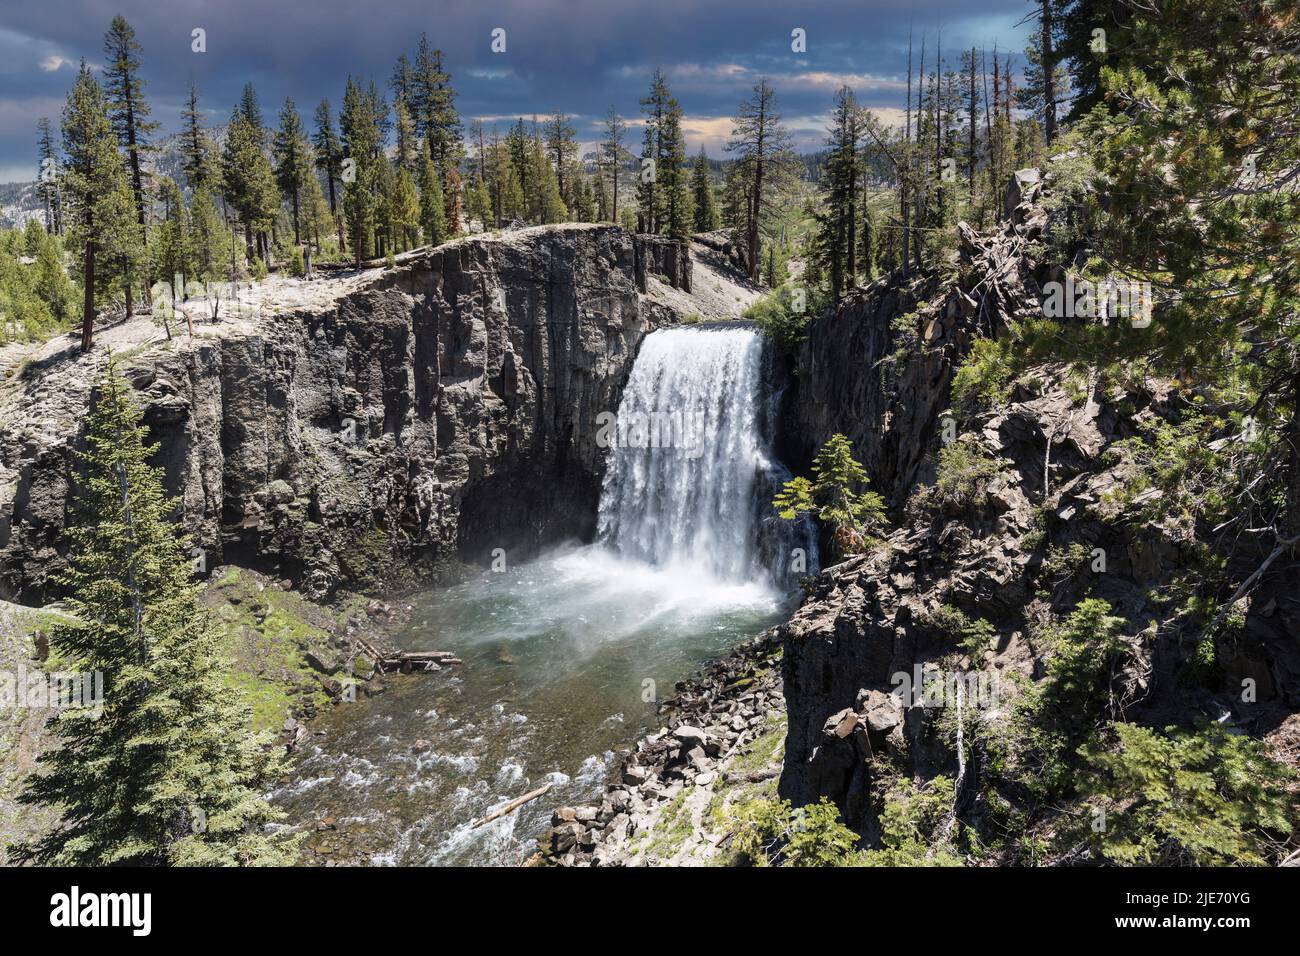 View of Rainbow Falls near Devils Postpile, Reds Meadow and Mammoth Lakes in the California Sierra Nevada Mountains. Stock Photo